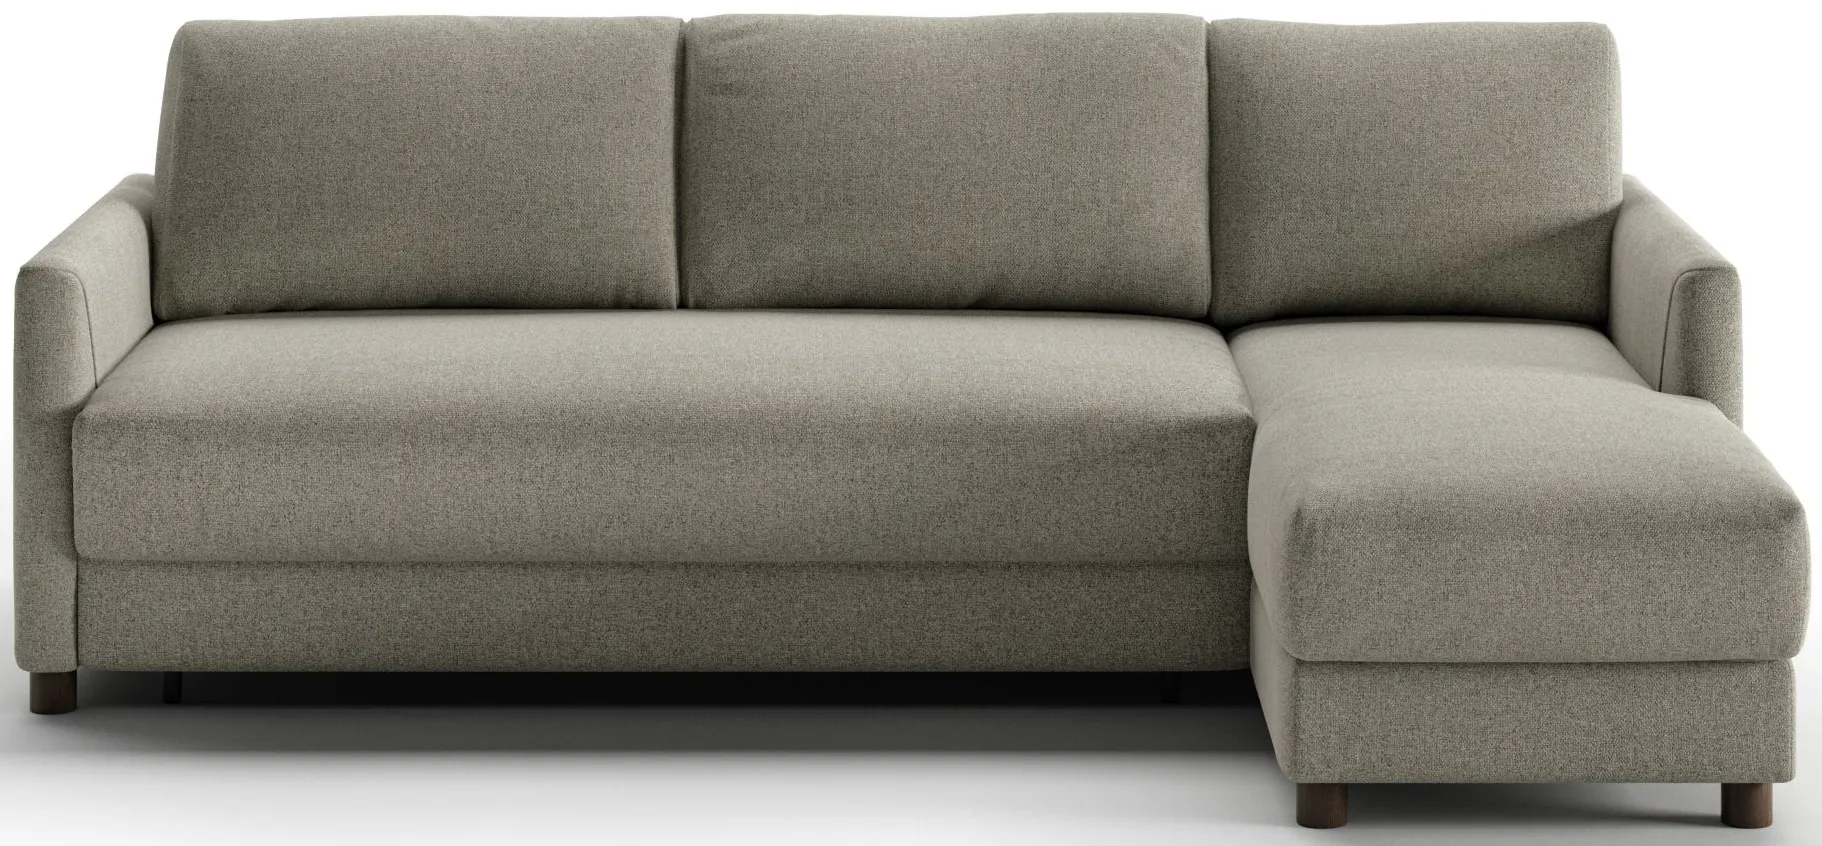 Pint Full XL Sectional Sleepr in Rene 03 by Luonto Furniture